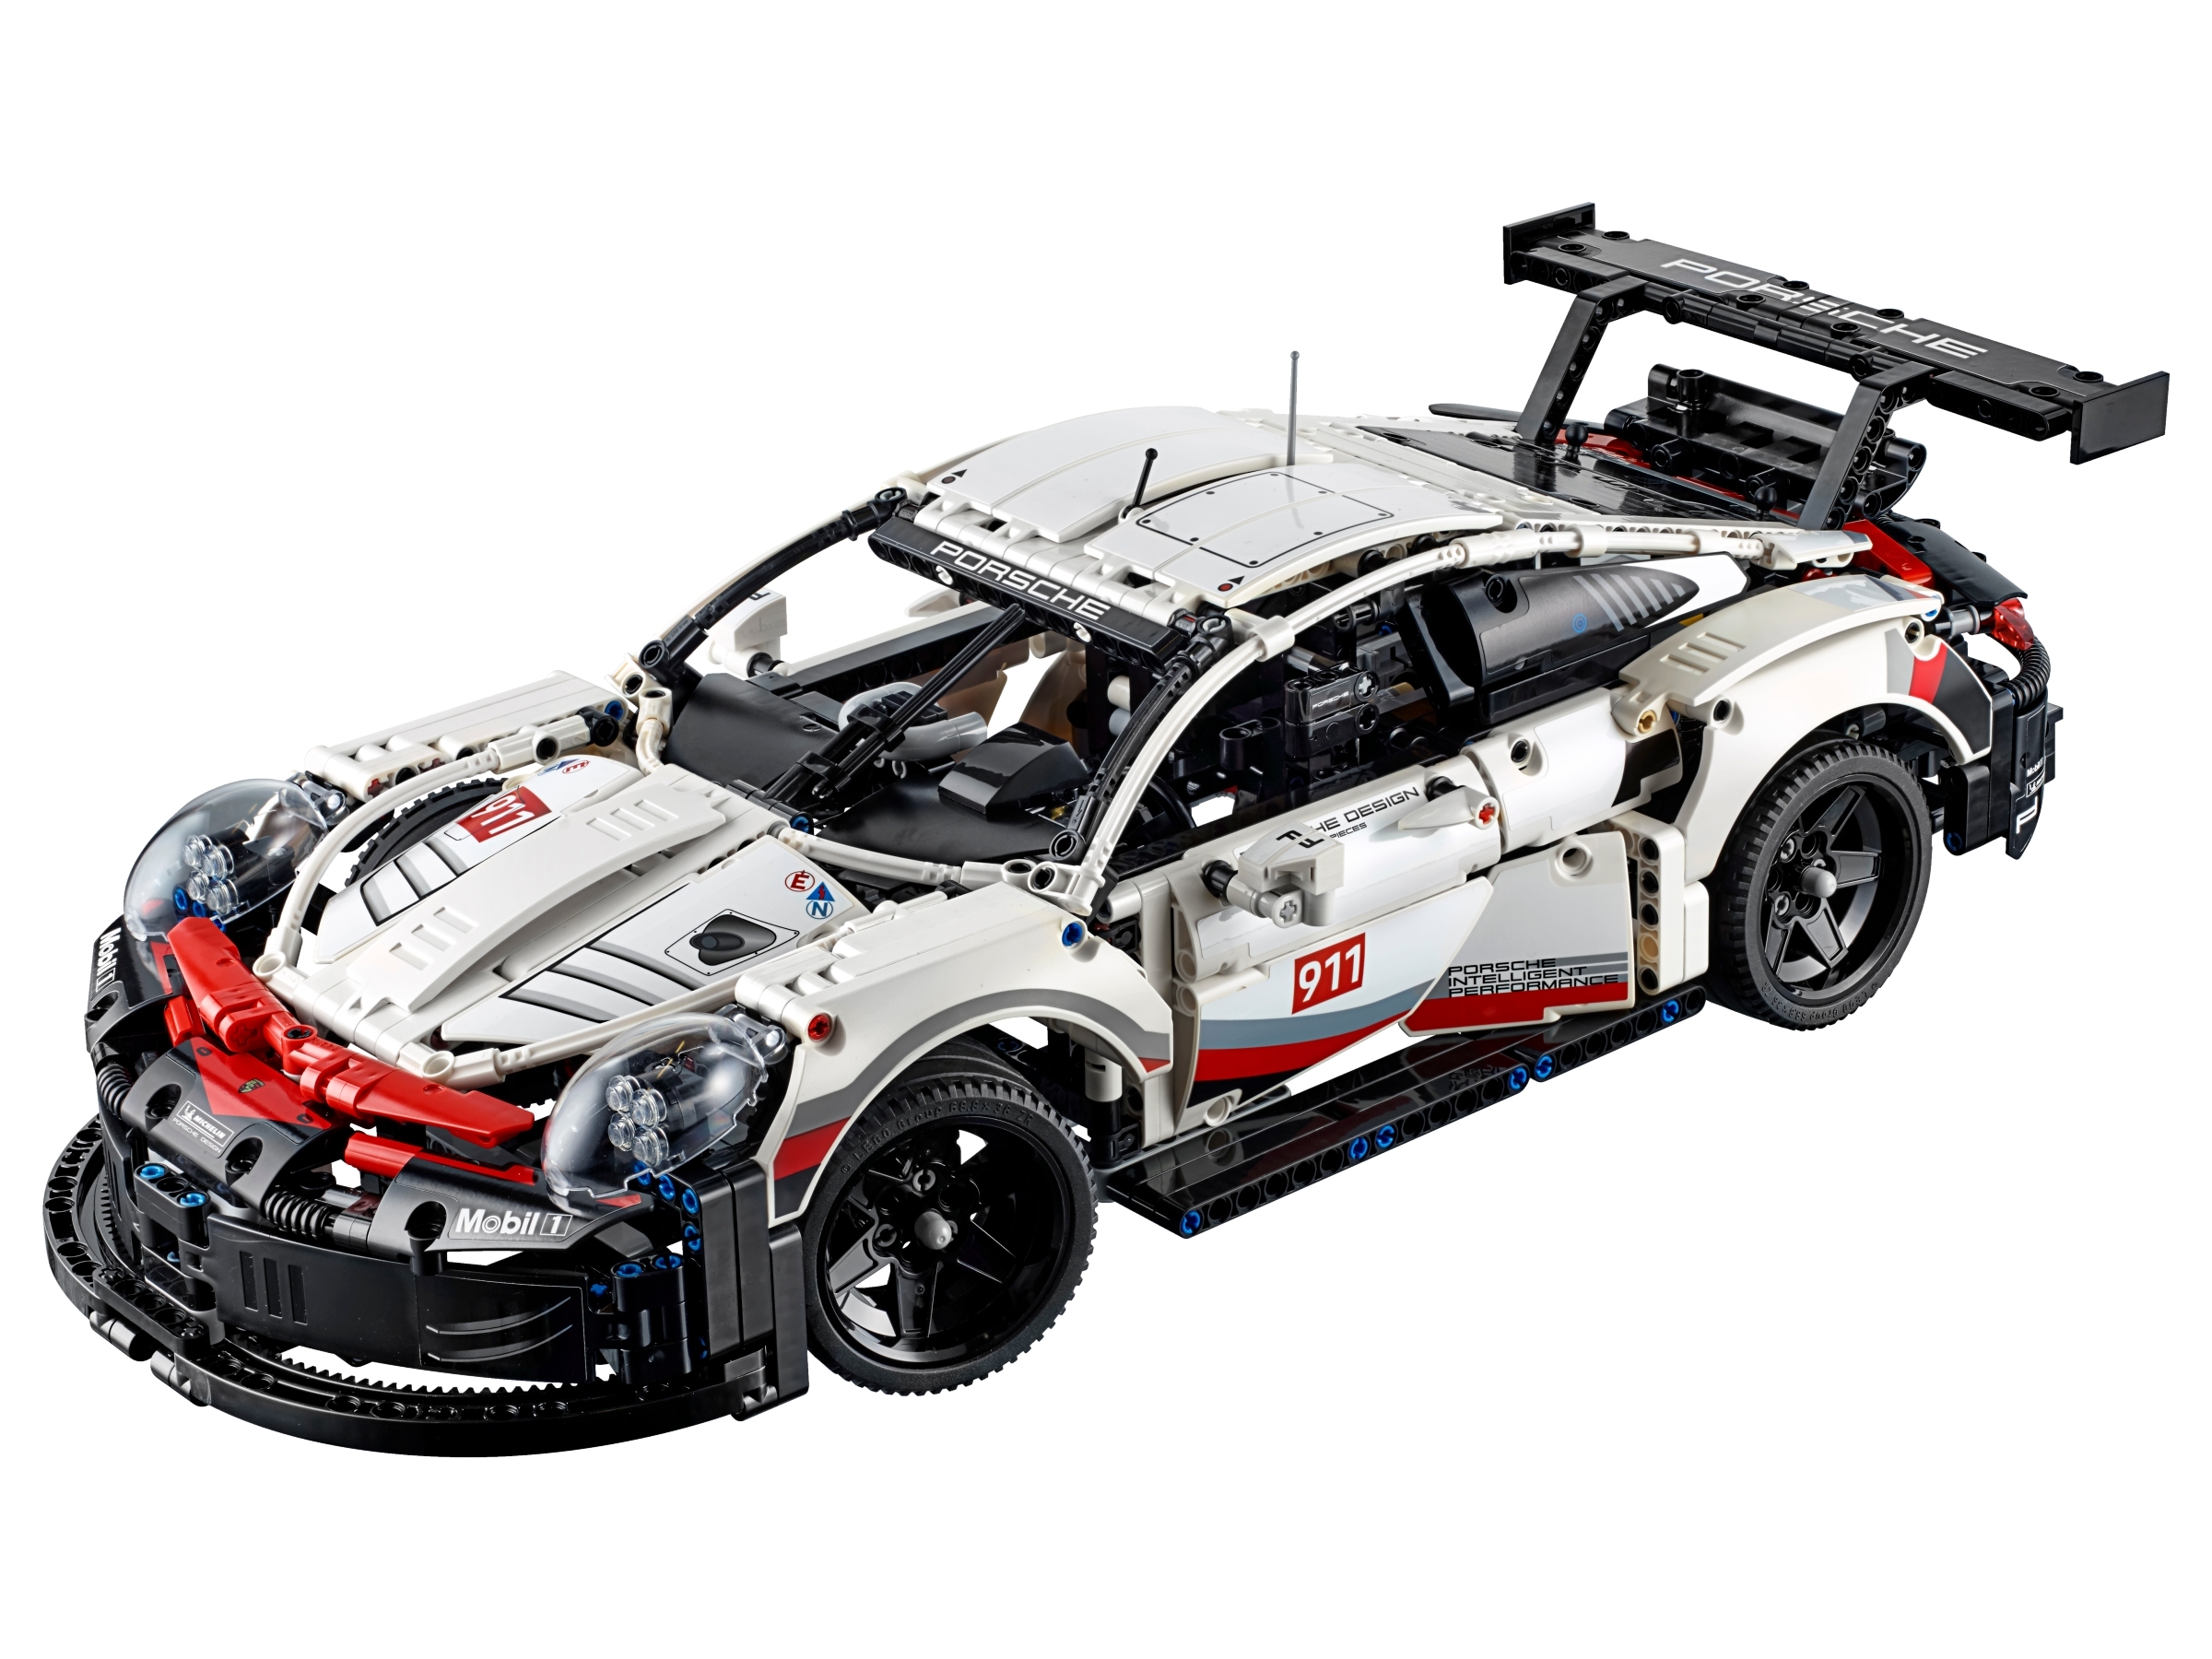 Absorbere flare besked Porsche 911 RSR 42096 | Technic™ | Buy online at the Official LEGO® Shop US